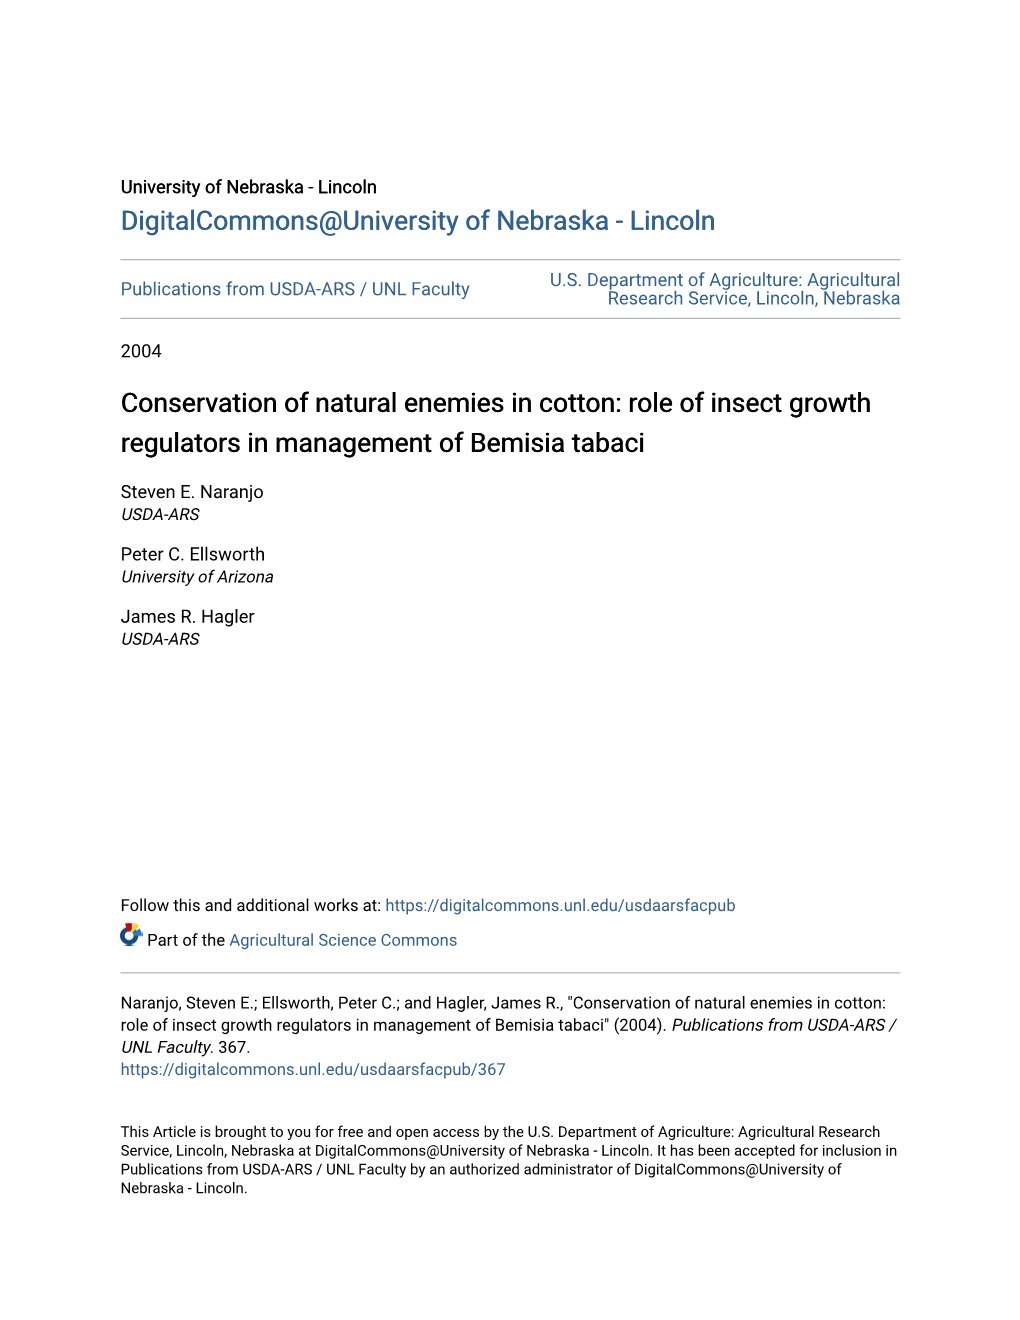 Conservation of Natural Enemies in Cotton: Role of Insect Growth Regulators in Management of Bemisia Tabaci